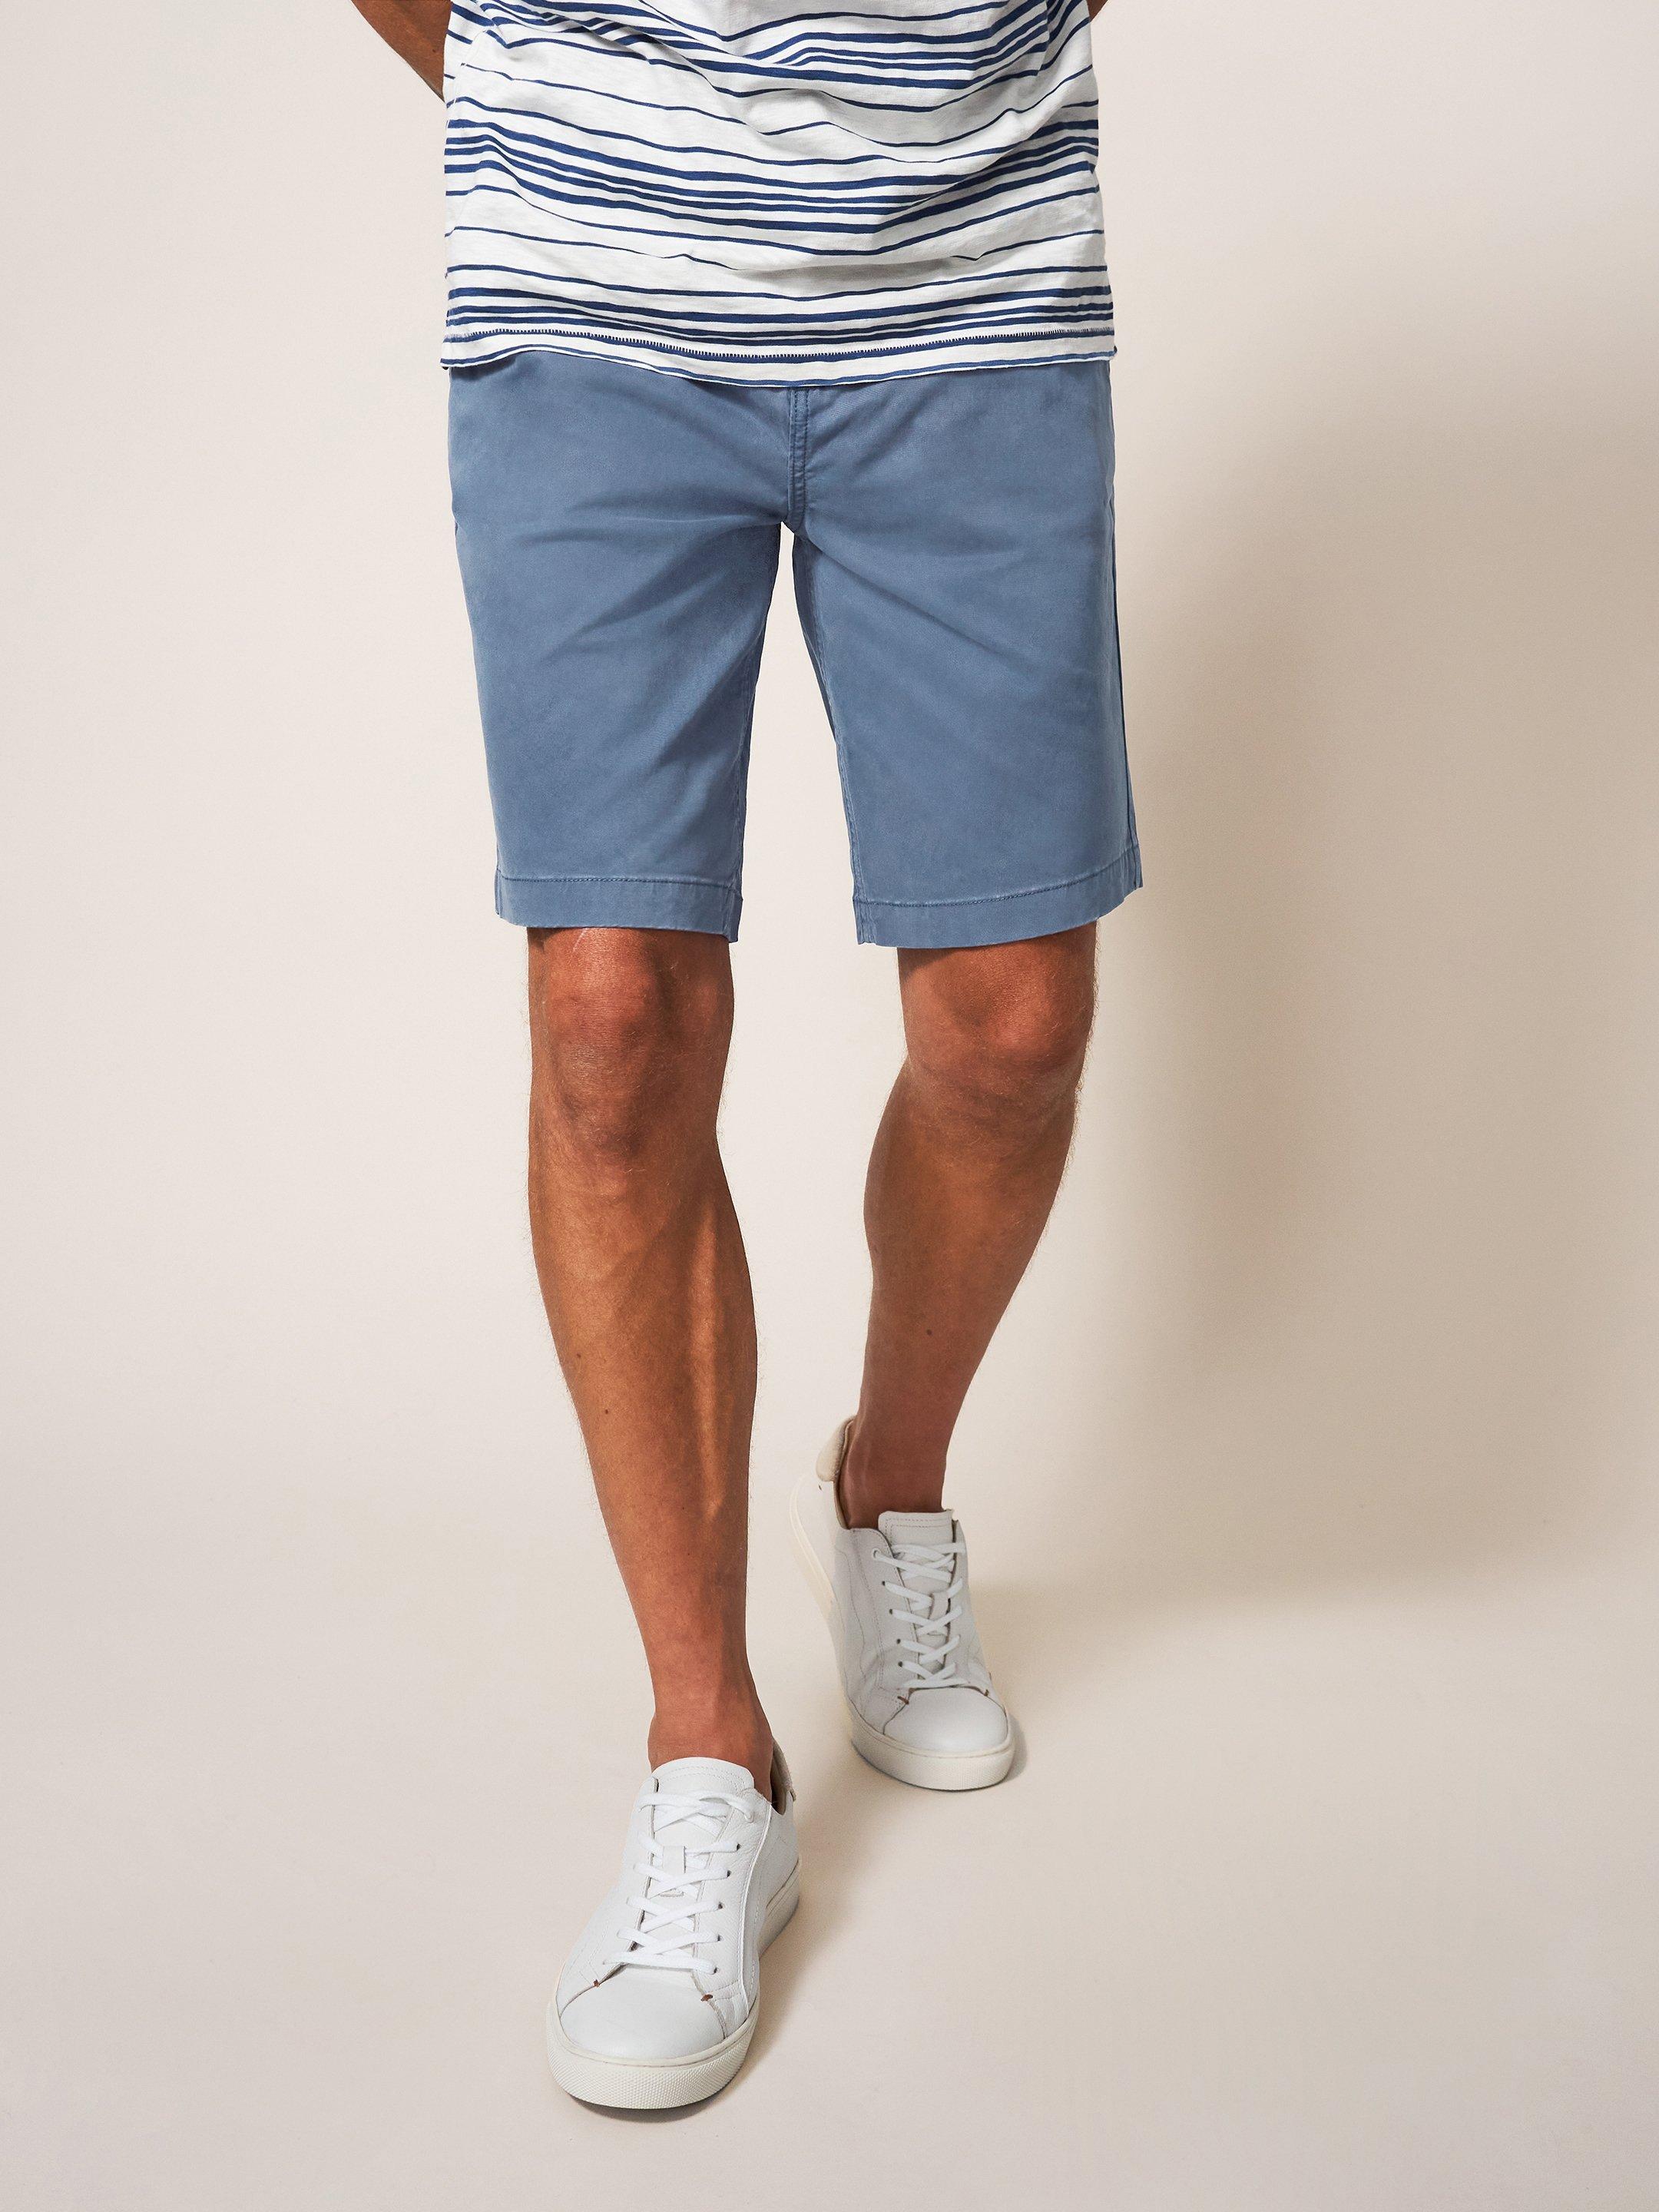 Sutton Organic Chino Short in DEEP BLUE - MODEL FRONT